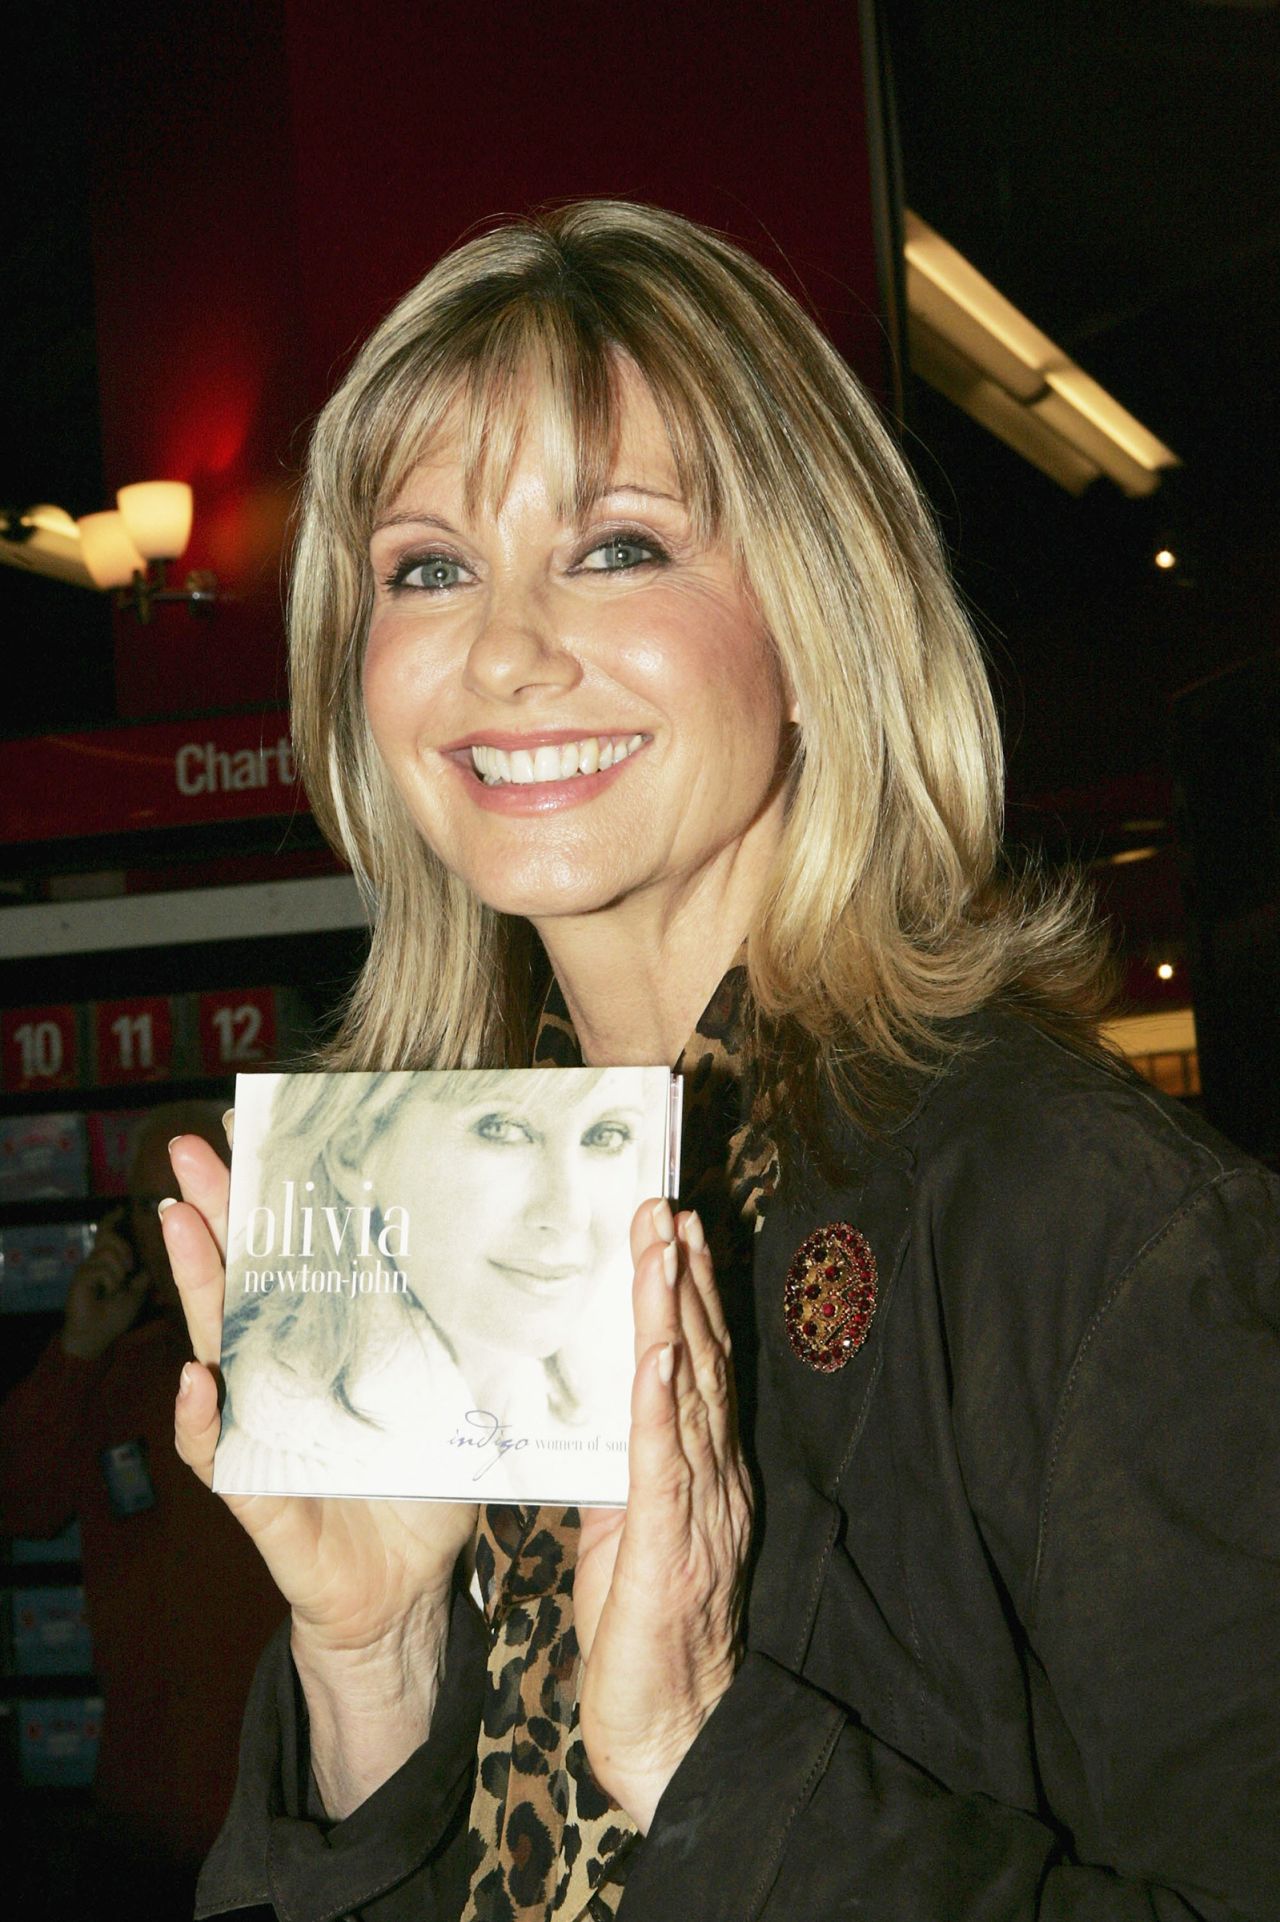 Newton-John promotes her album "Indigo: Women Of Song" at a store in Sydney in 2004.